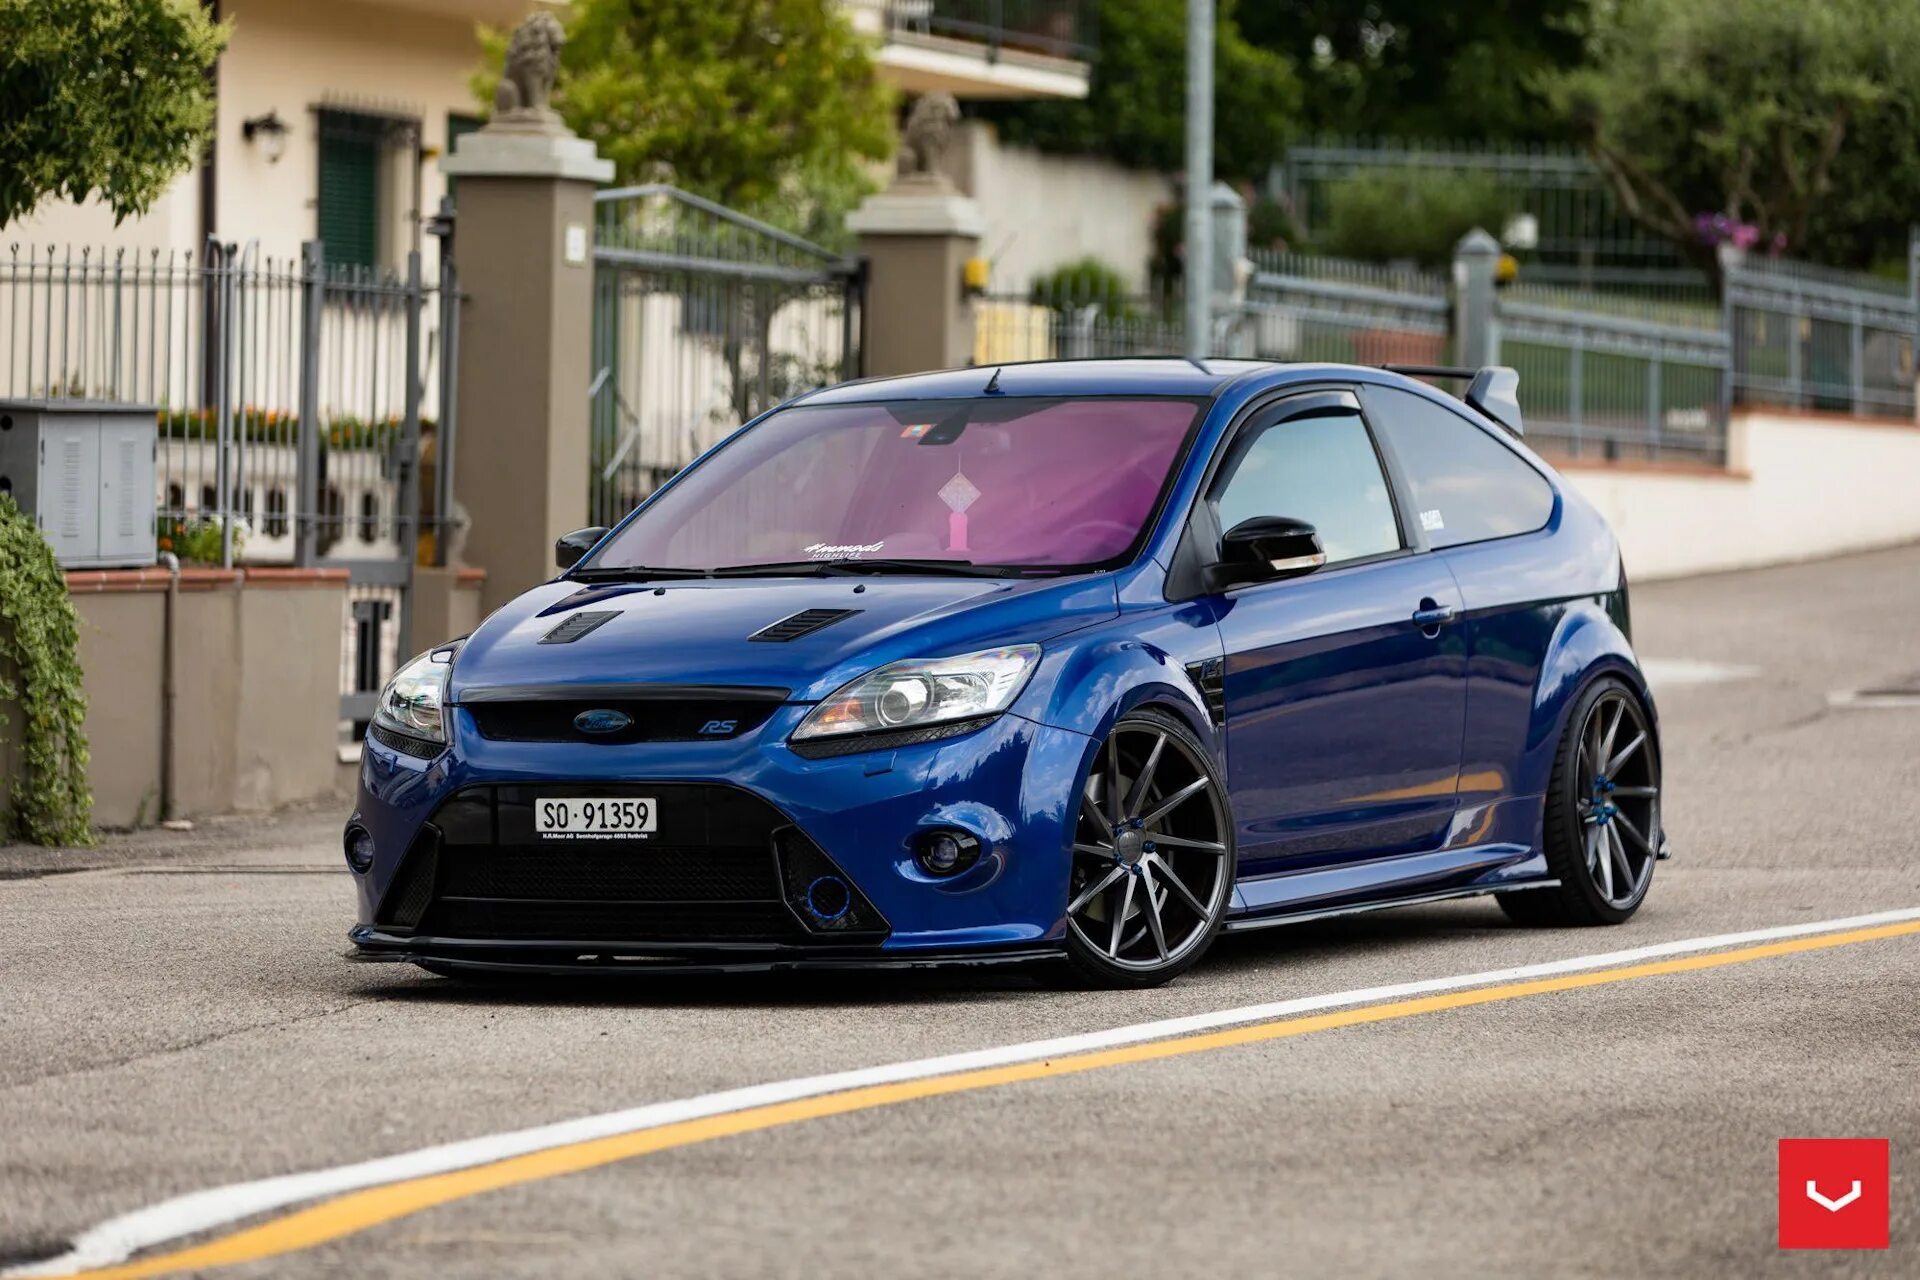 Cs2 focus. Focus RS mk2. Ford Focus RS mk3. Ford Focus 2 RS. Форд фокус RS mk2.